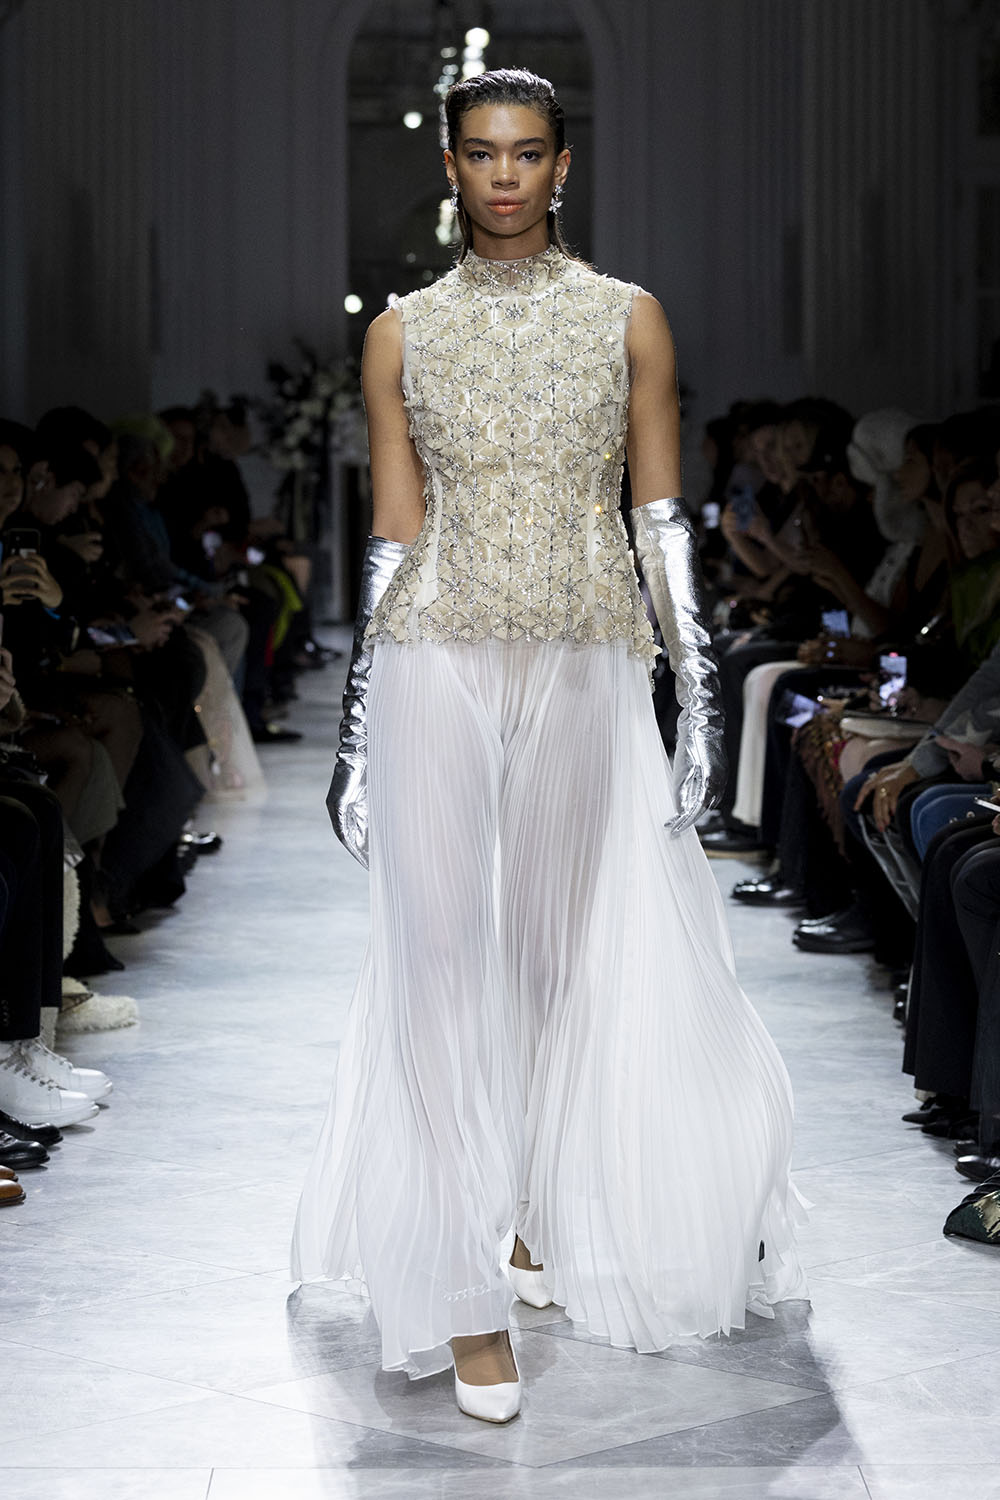 Crystal Lattice Embroidered Tulle Top with Ivory Gazaar and Pleated Chiffon Gown